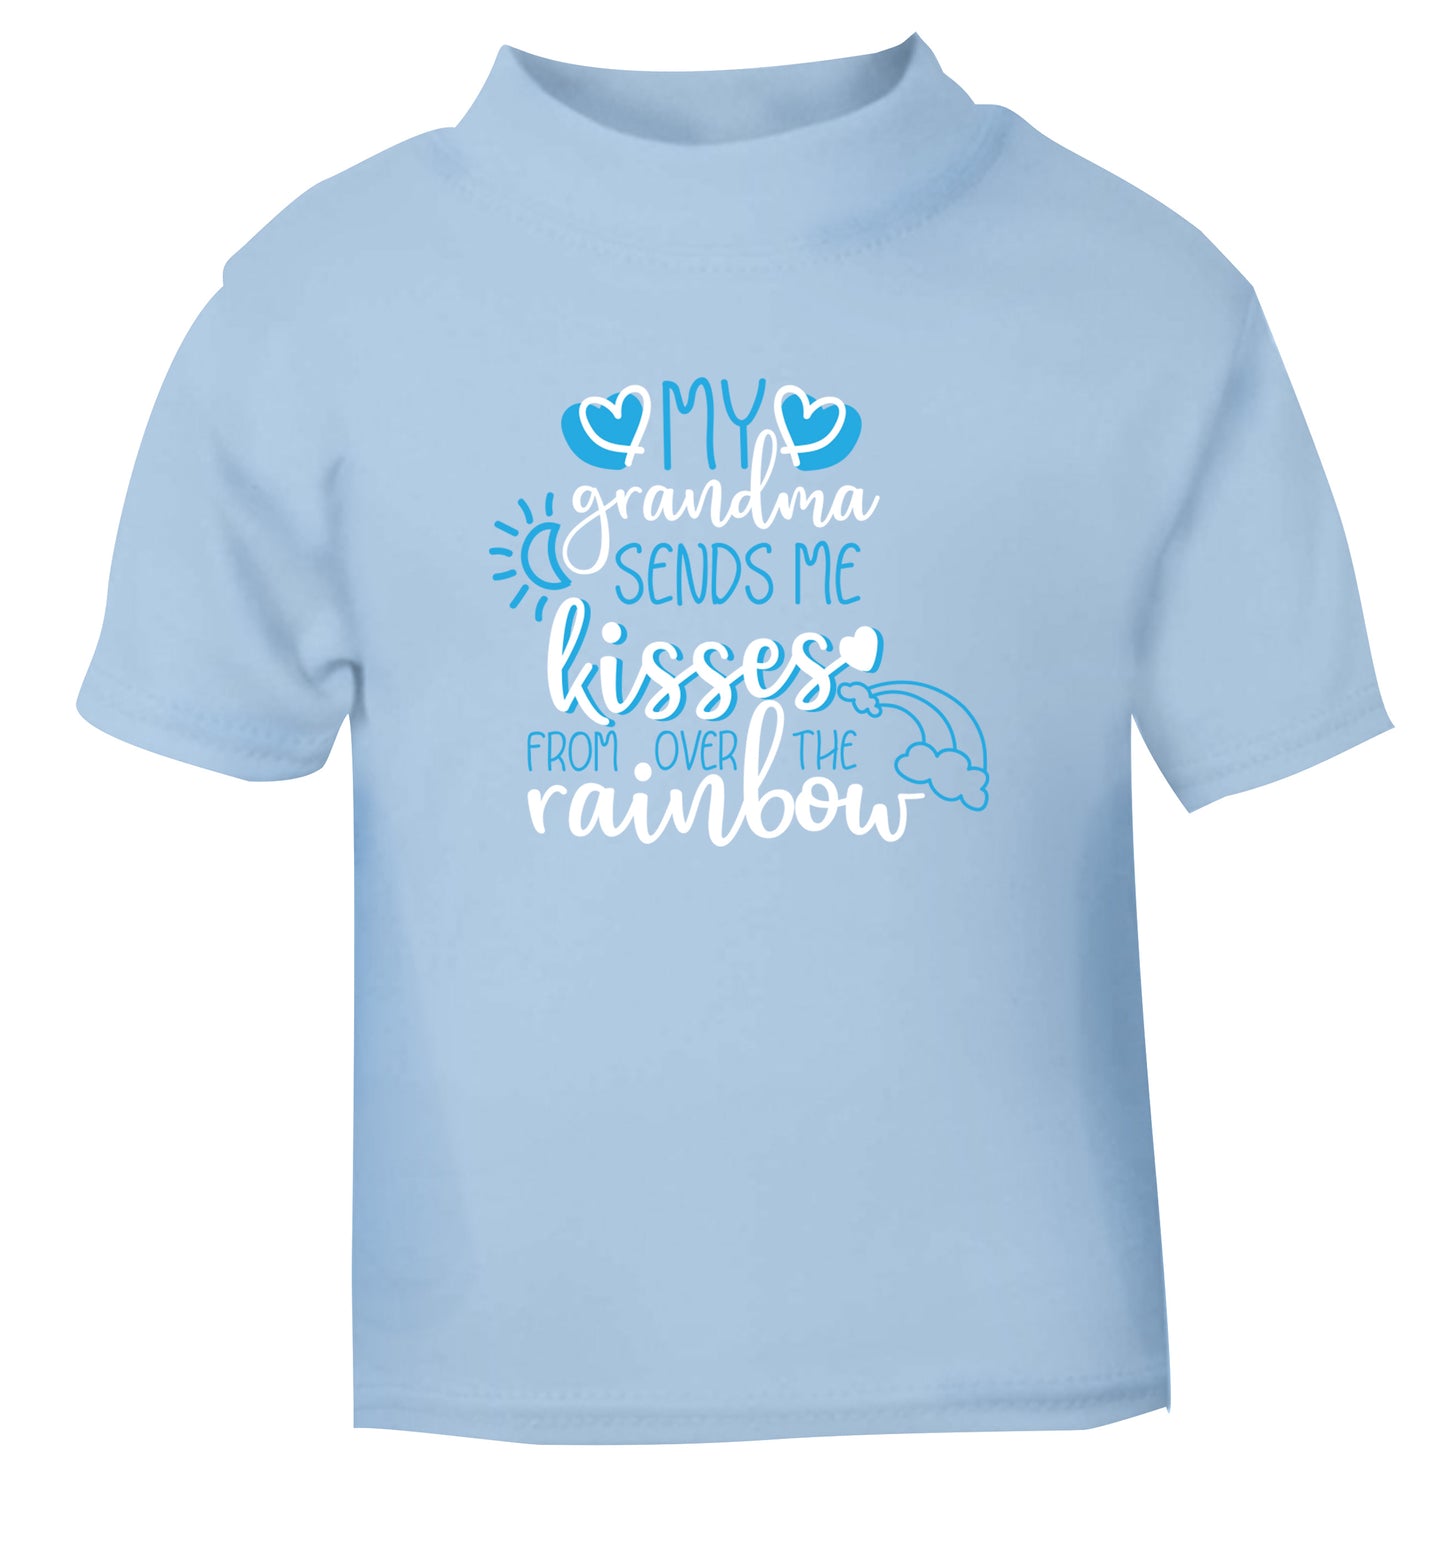 My grandma sends me kisses from over the rainbow light blue Baby Toddler Tshirt 2 Years